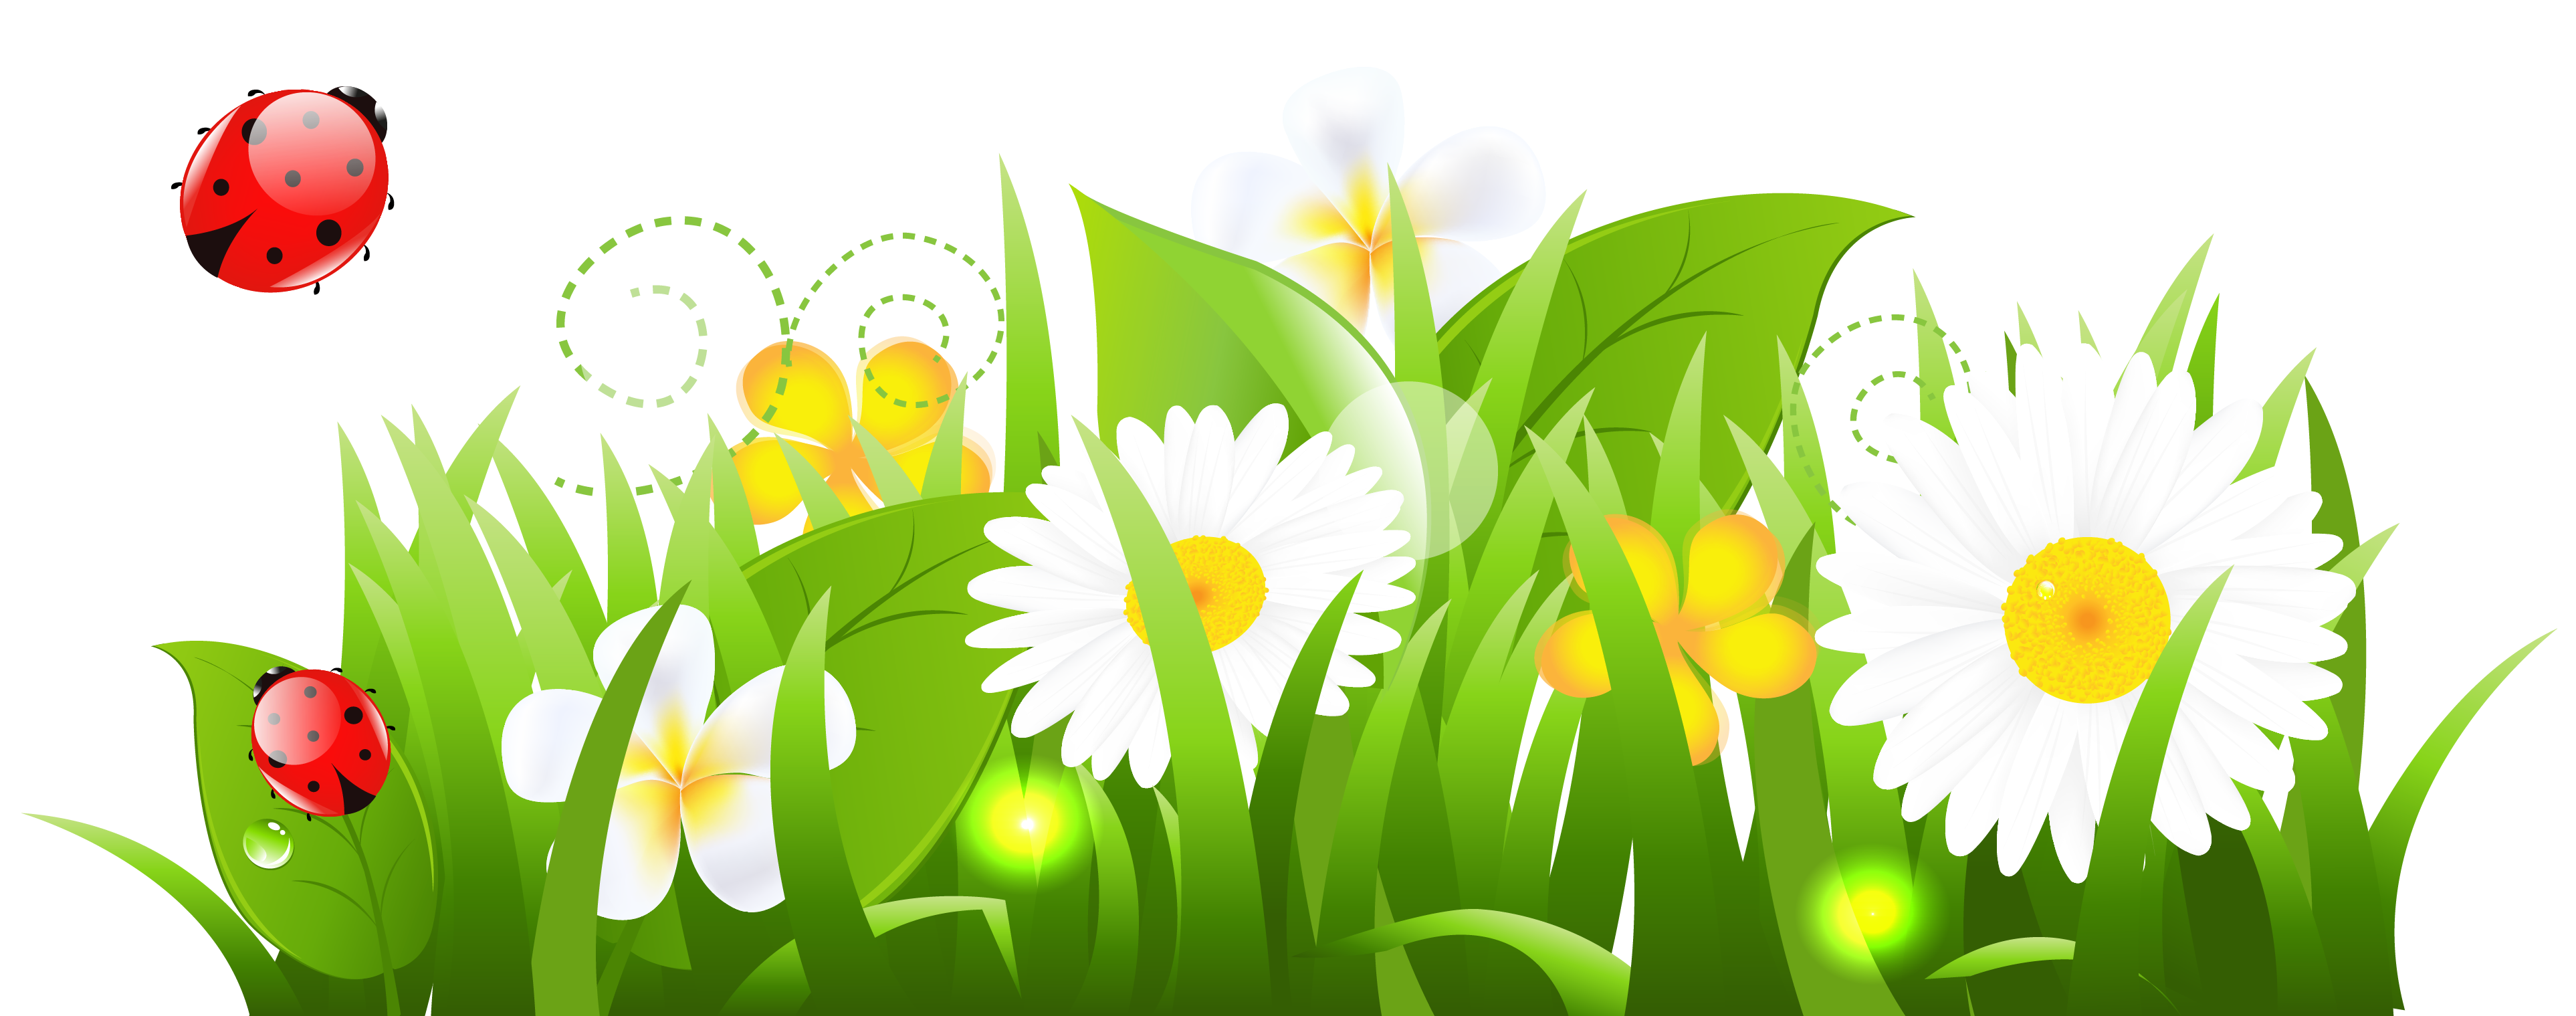 Grass and flowers clipart clipartix